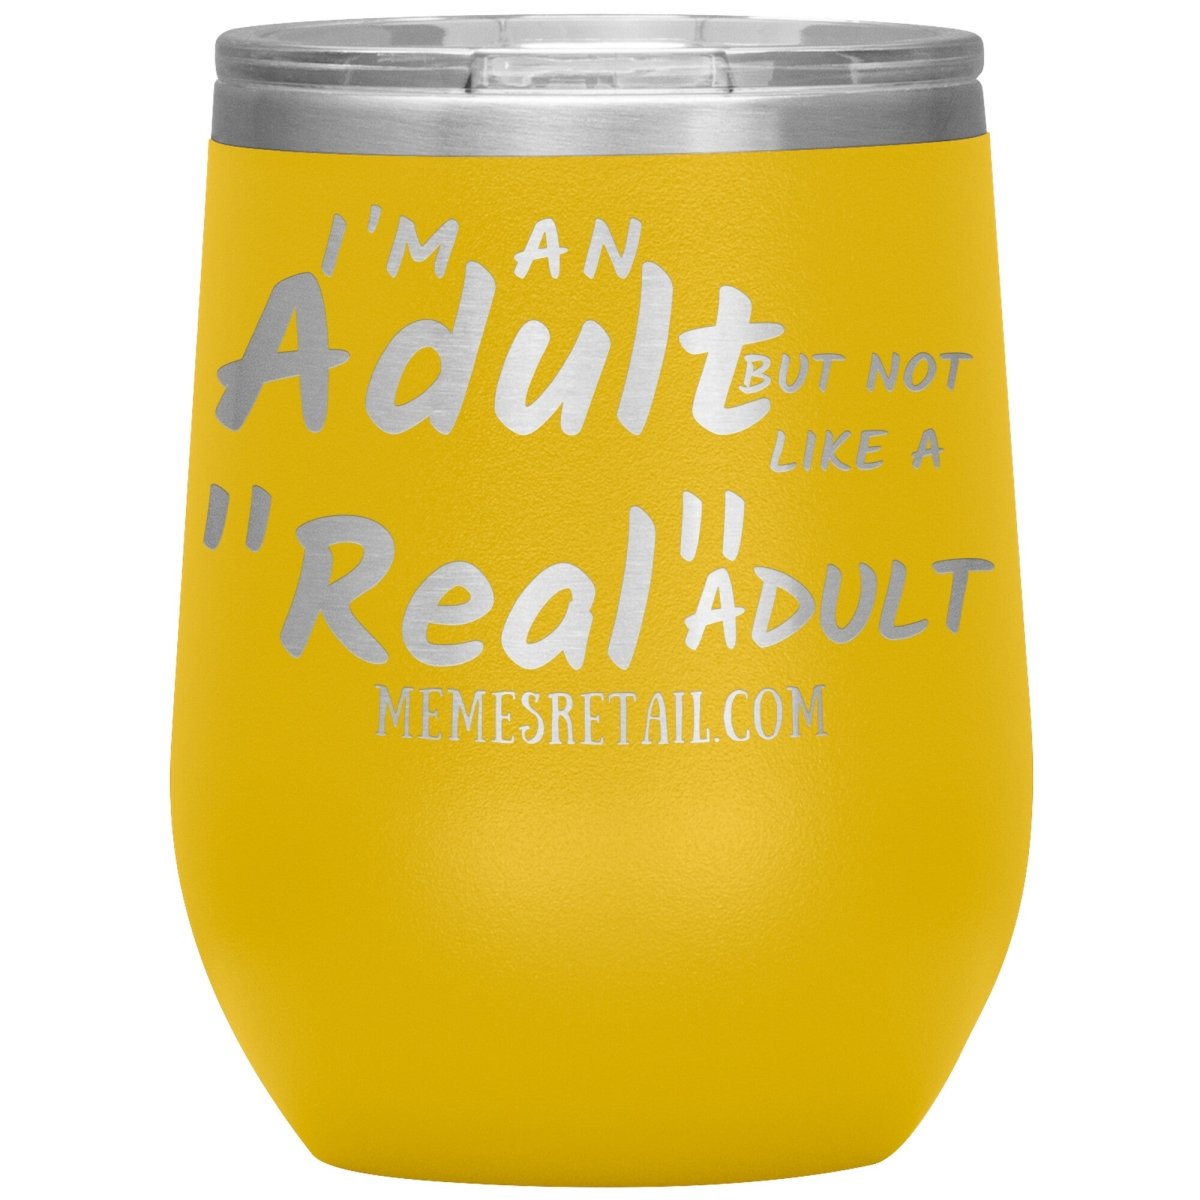 I'm an adult, but not like a "real" adult Tumblers, 12oz Wine Insulated Tumbler / Yellow - MemesRetail.com